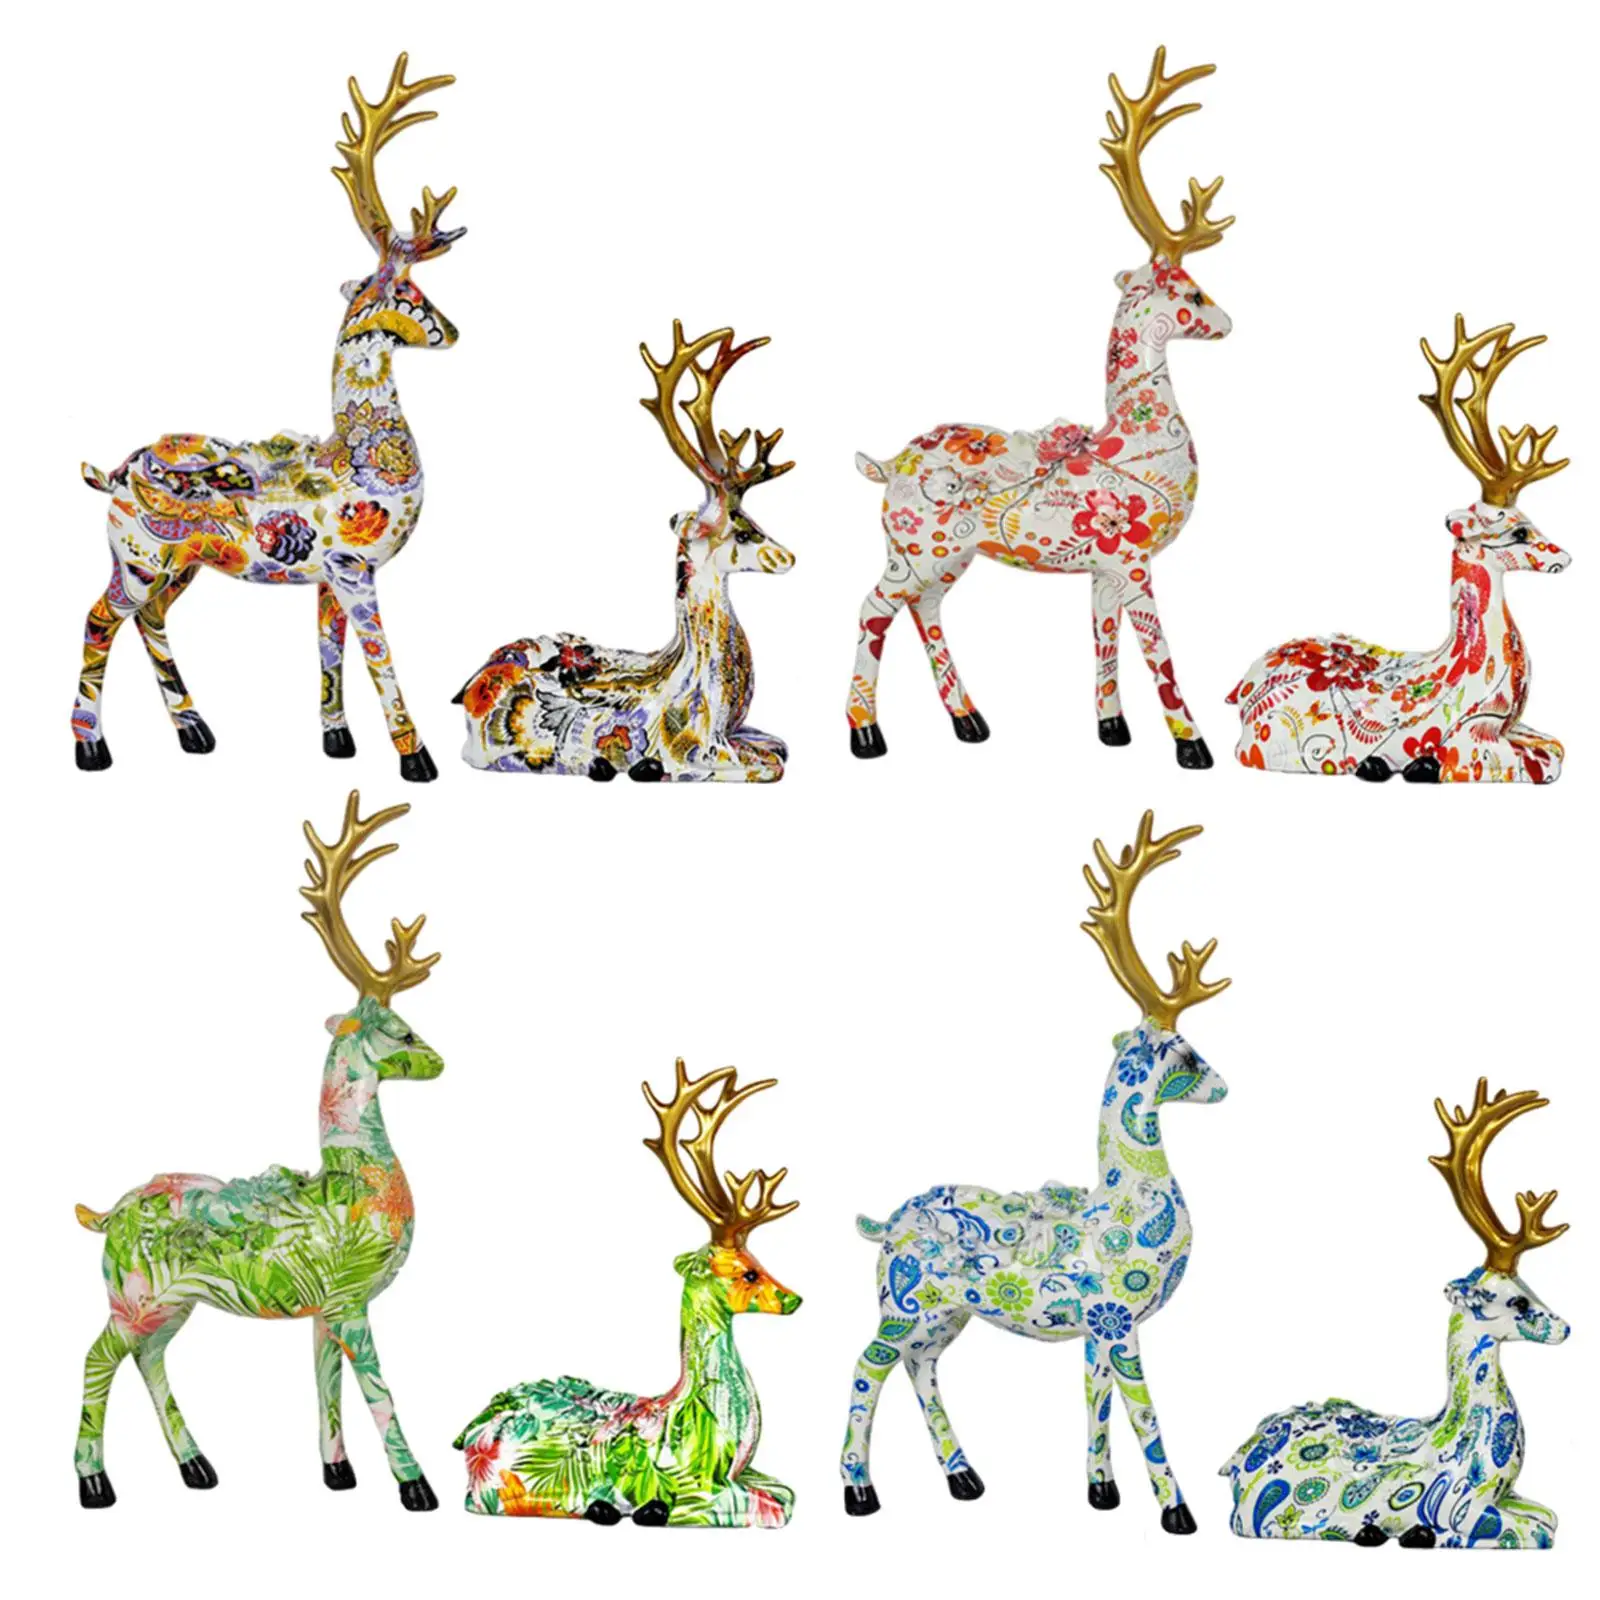 2 Pieces Reindeer Statues Deer Figurines for New Year Party Valentine Day